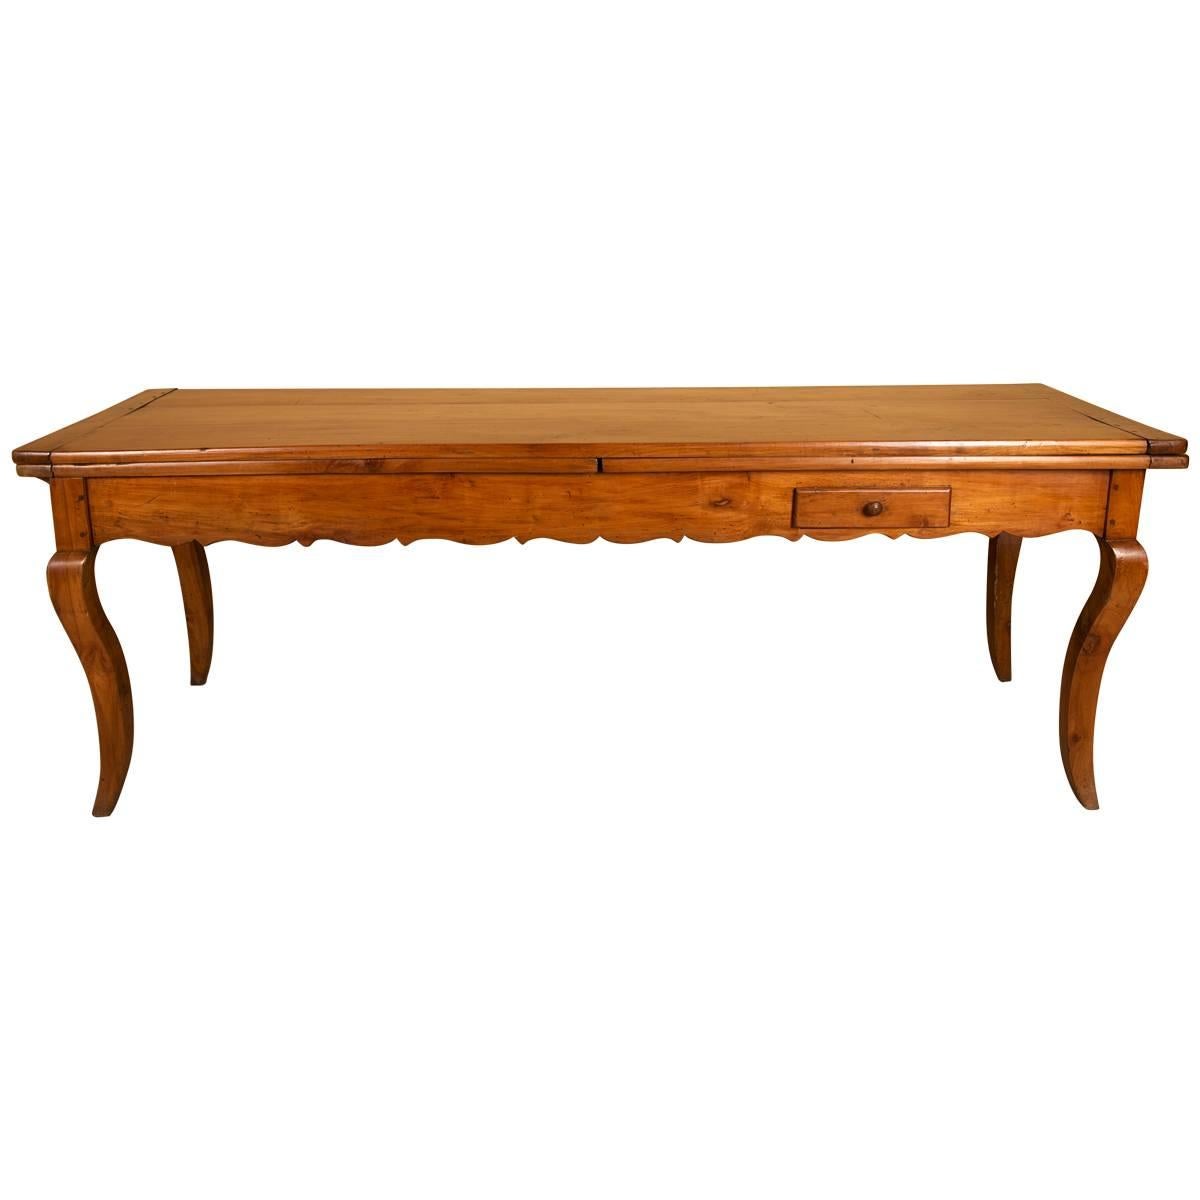 Provincial French Farm Table in Cherrywood, with Extendable Leaves, circa 1830 For Sale